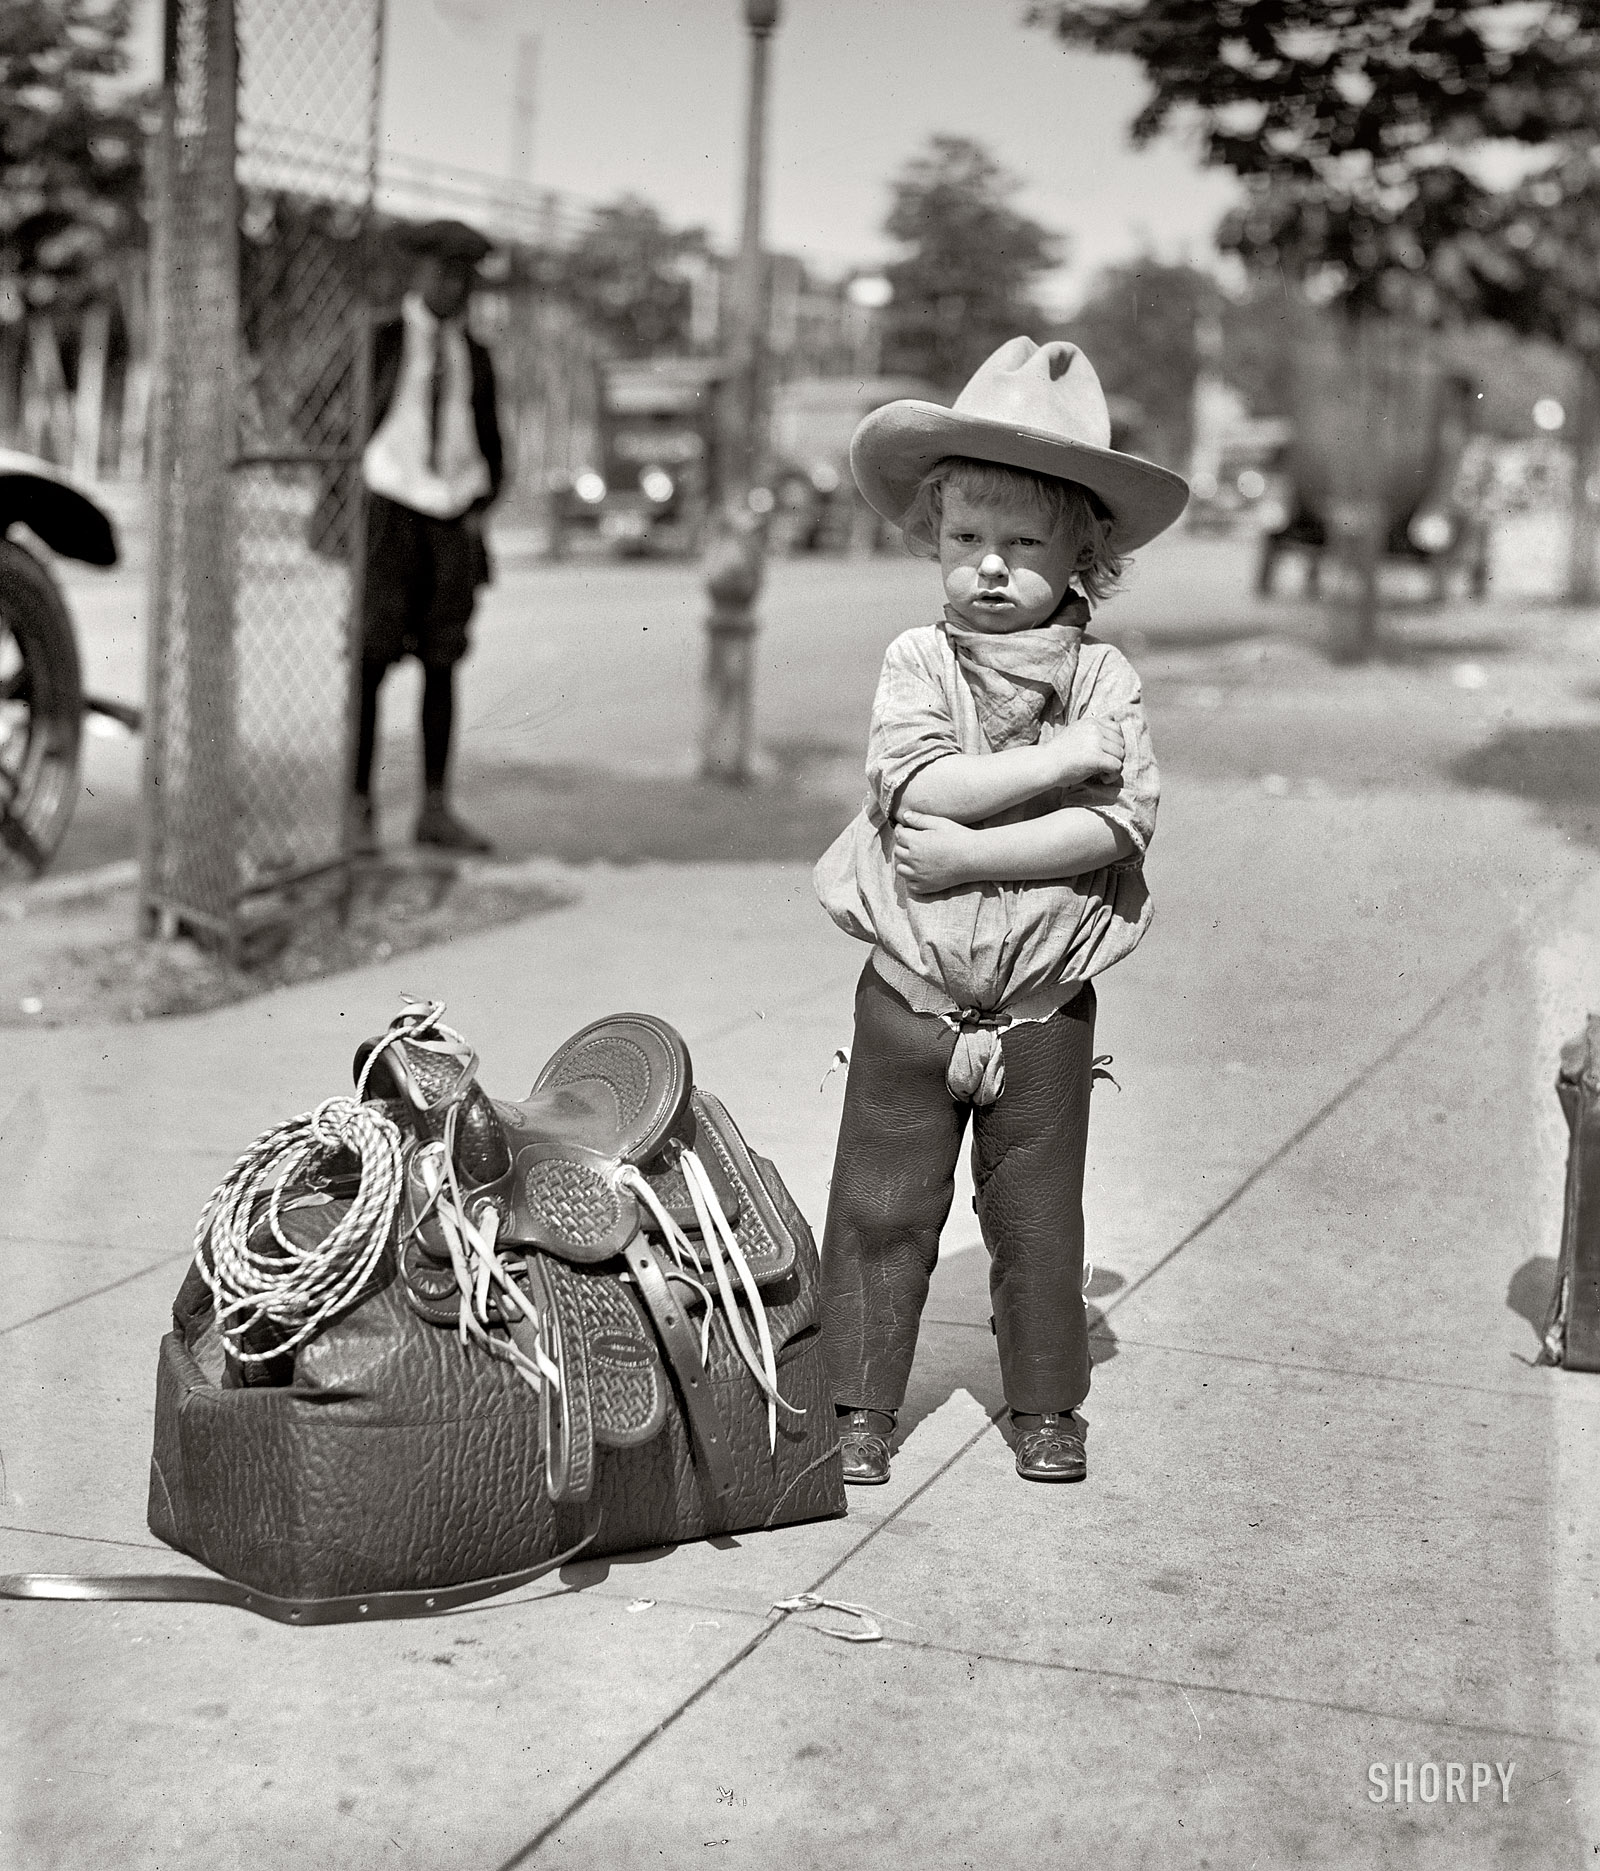 Washington, D.C. May 29, 1923. "Foghorn Clancy Jr., youngest member of the rodeo to perform in Wild West show during the Shrine convention." National Photo Company Collection glass negative. View full size.